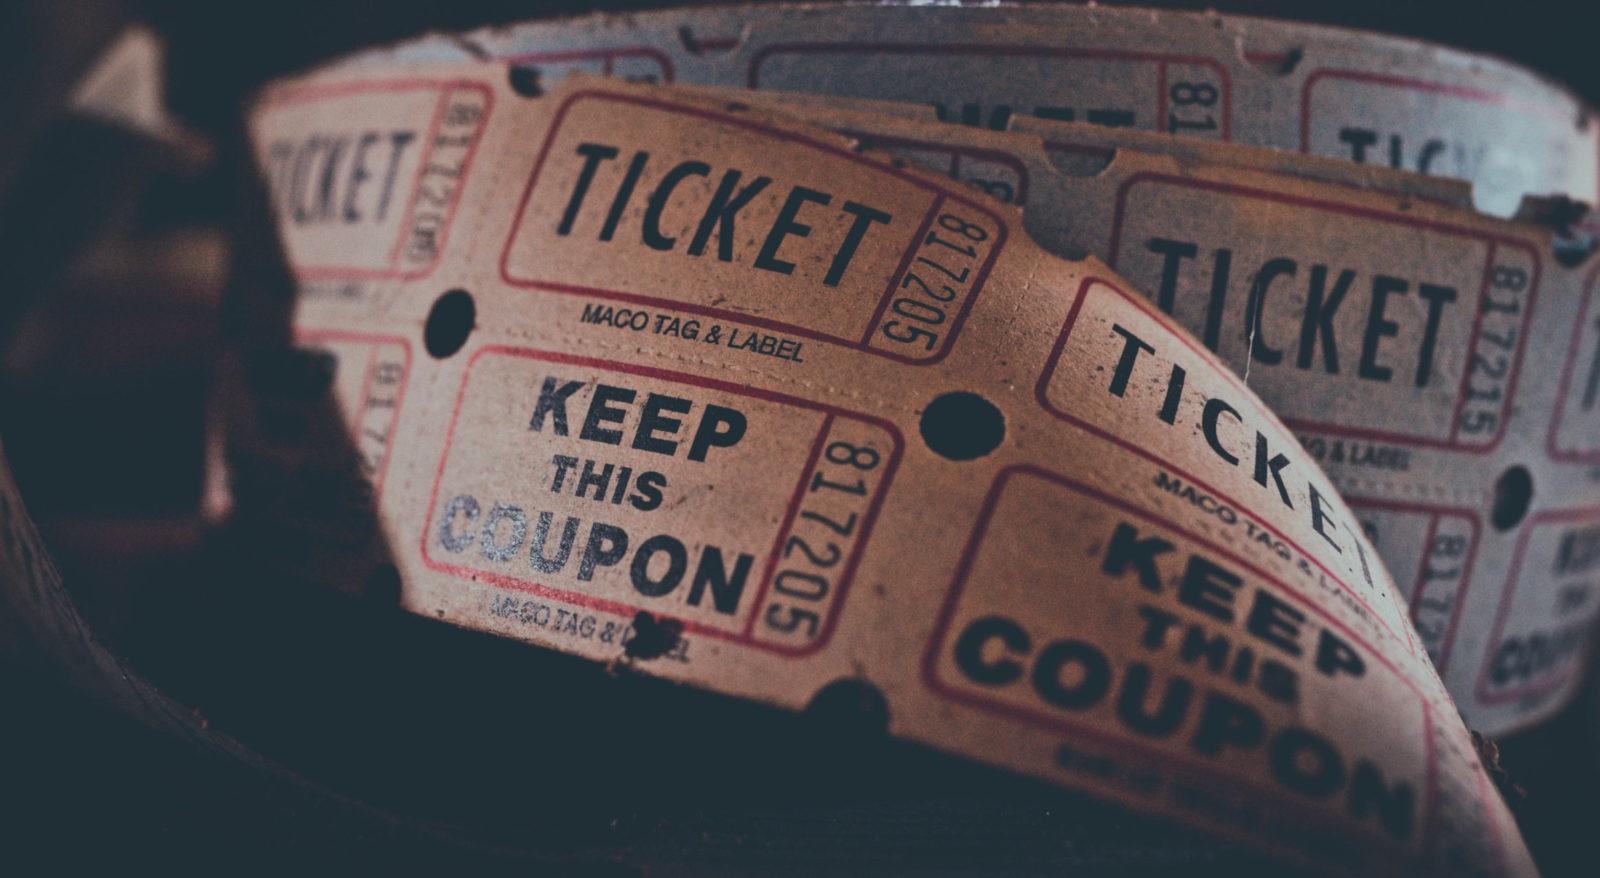 Event booking websites digitize tickets. Say goodbye to those old scraps of paper!